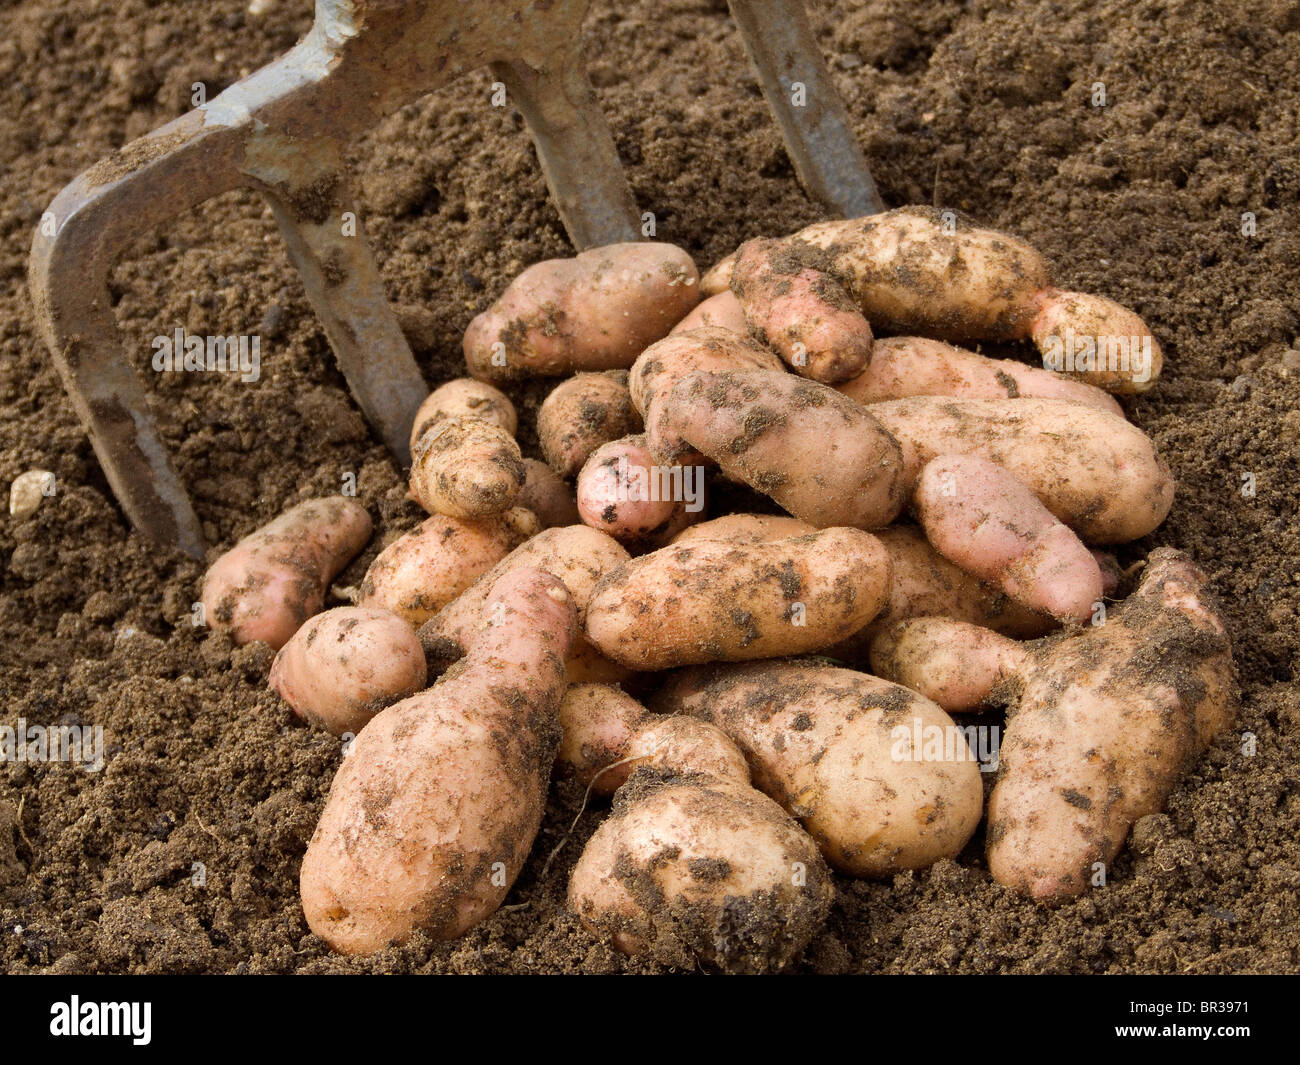 Home grown Pink Fir Apple potatoes  just after being dug and displayed nest to a garden fork Stock Photo